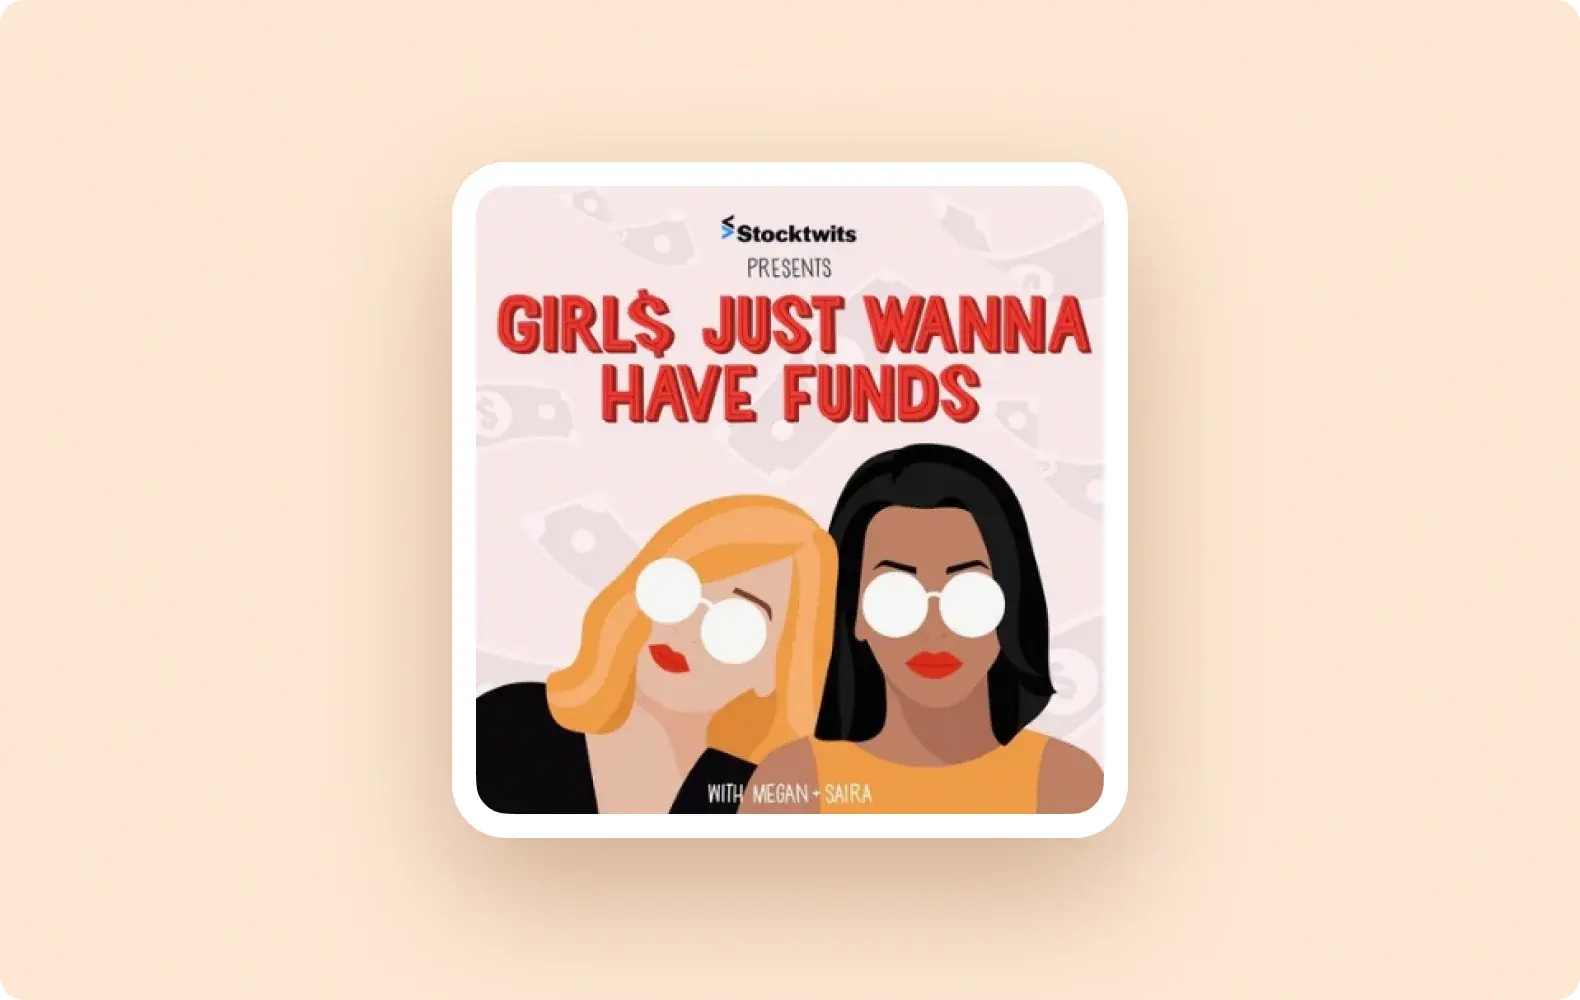 Artwork for the Girls Just Wanna Have Funds podcast.